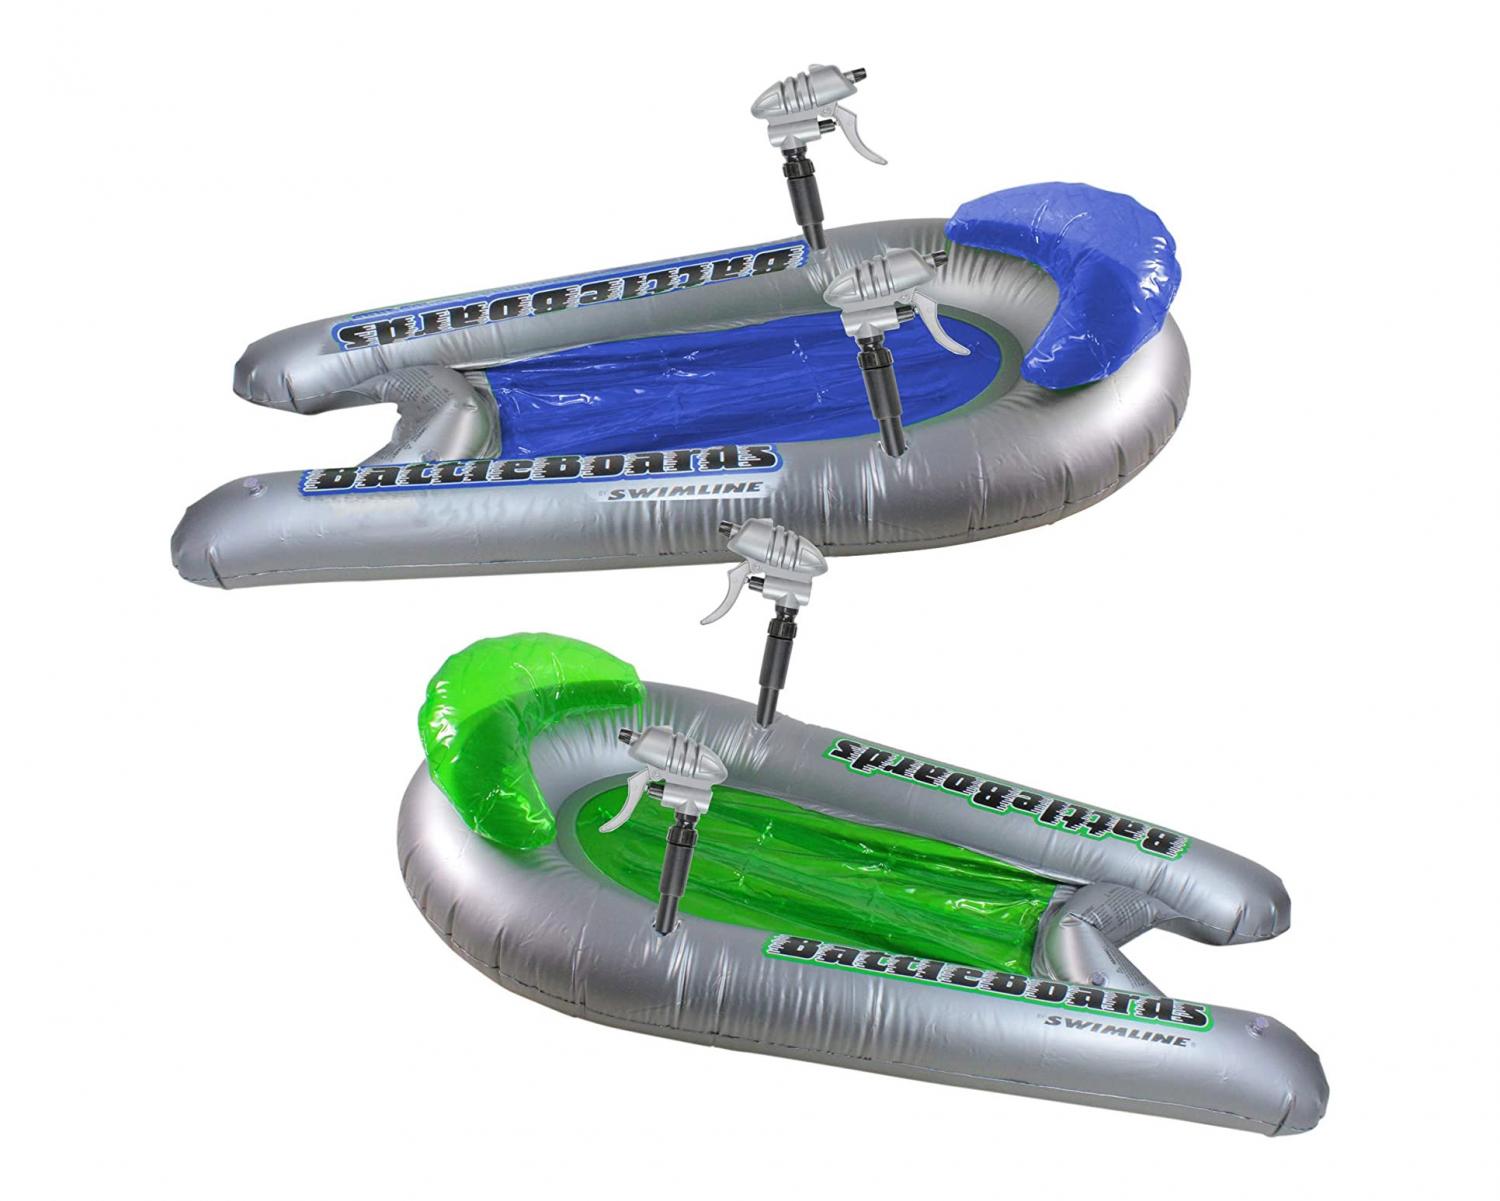 Inflatable pool float with integrated squirt guns - Pool toy with built-in water blaster